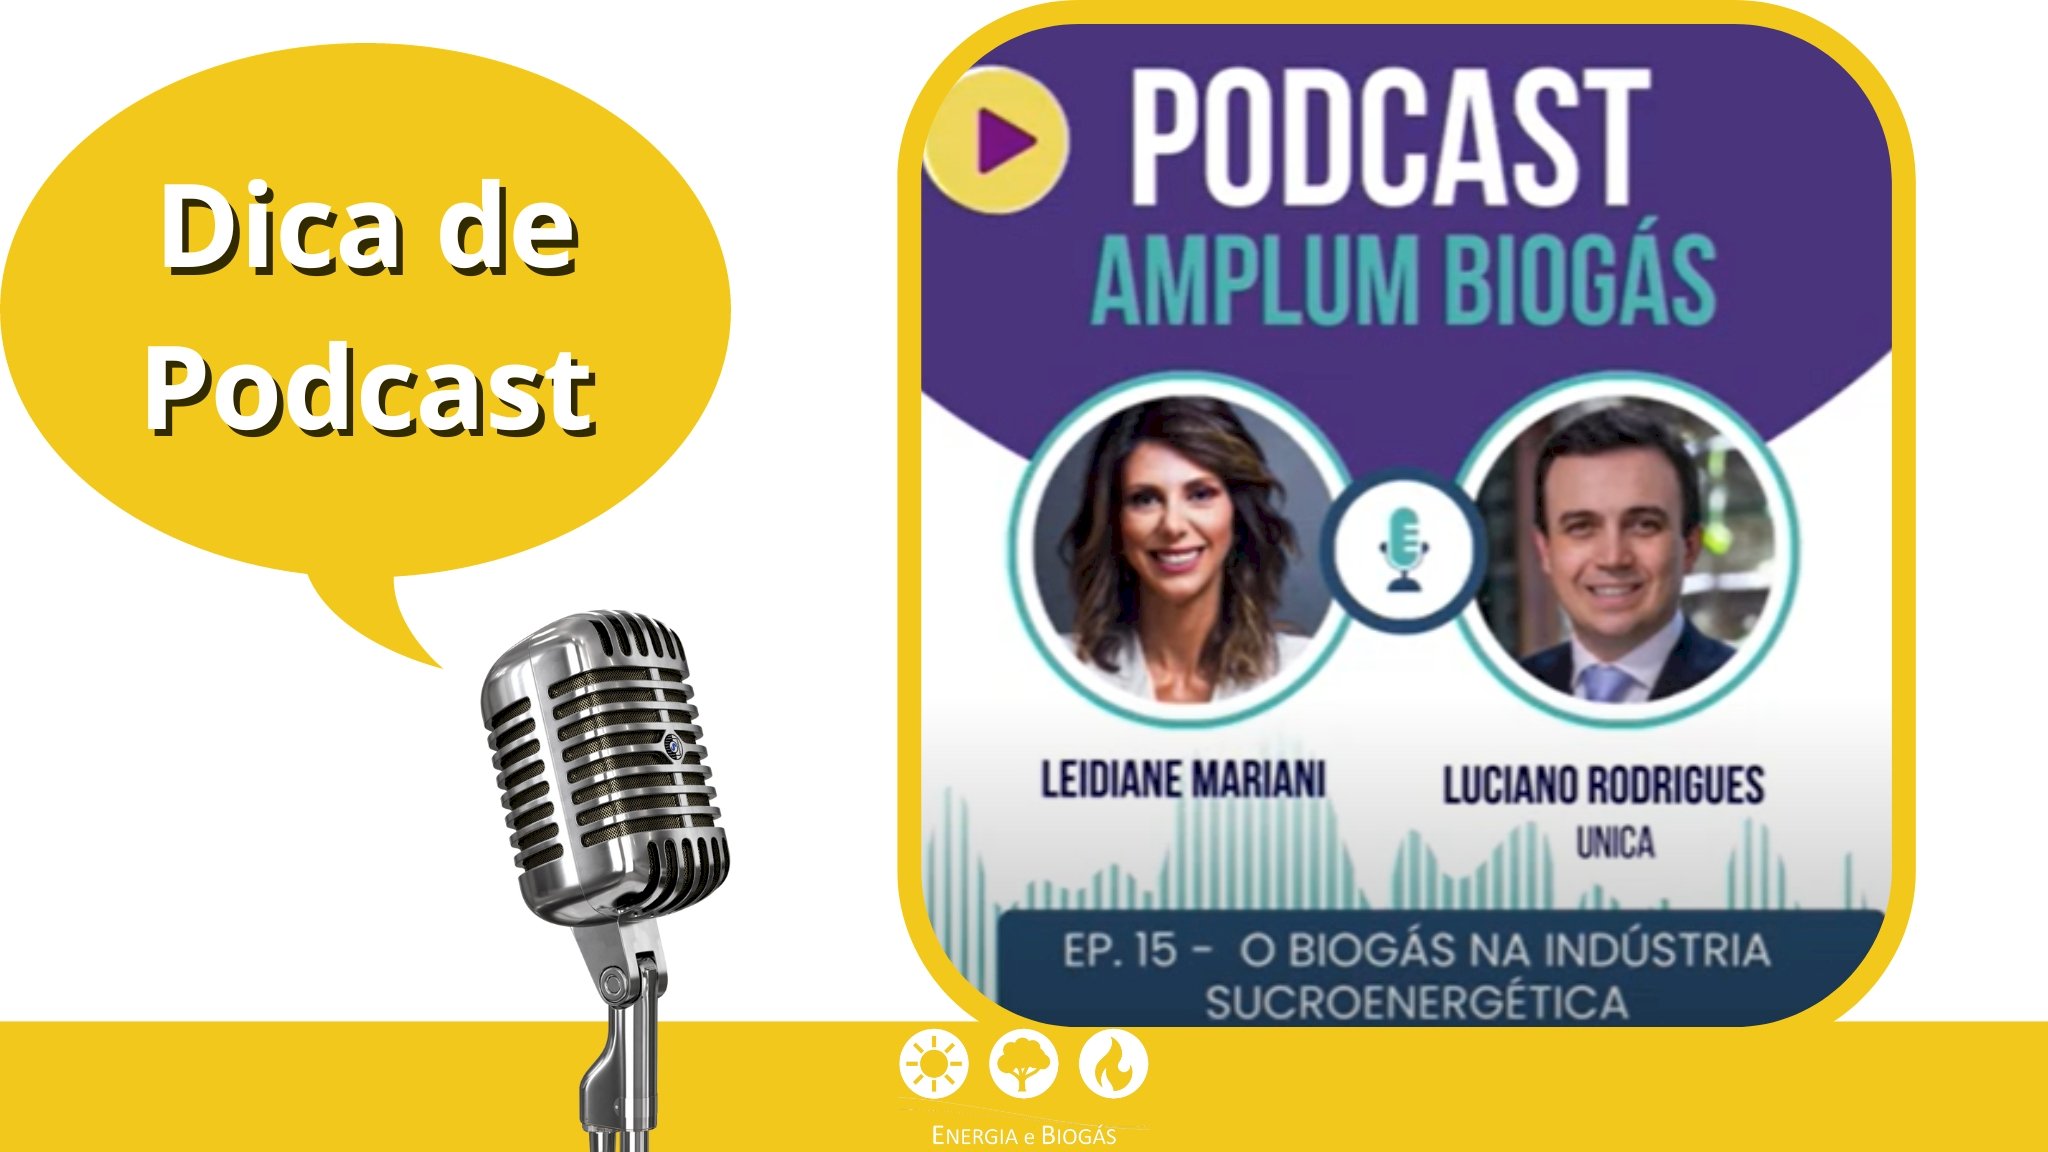 Podcast Amplum Biogás Ep 15 - Luciano Rodrigues (UNICA)